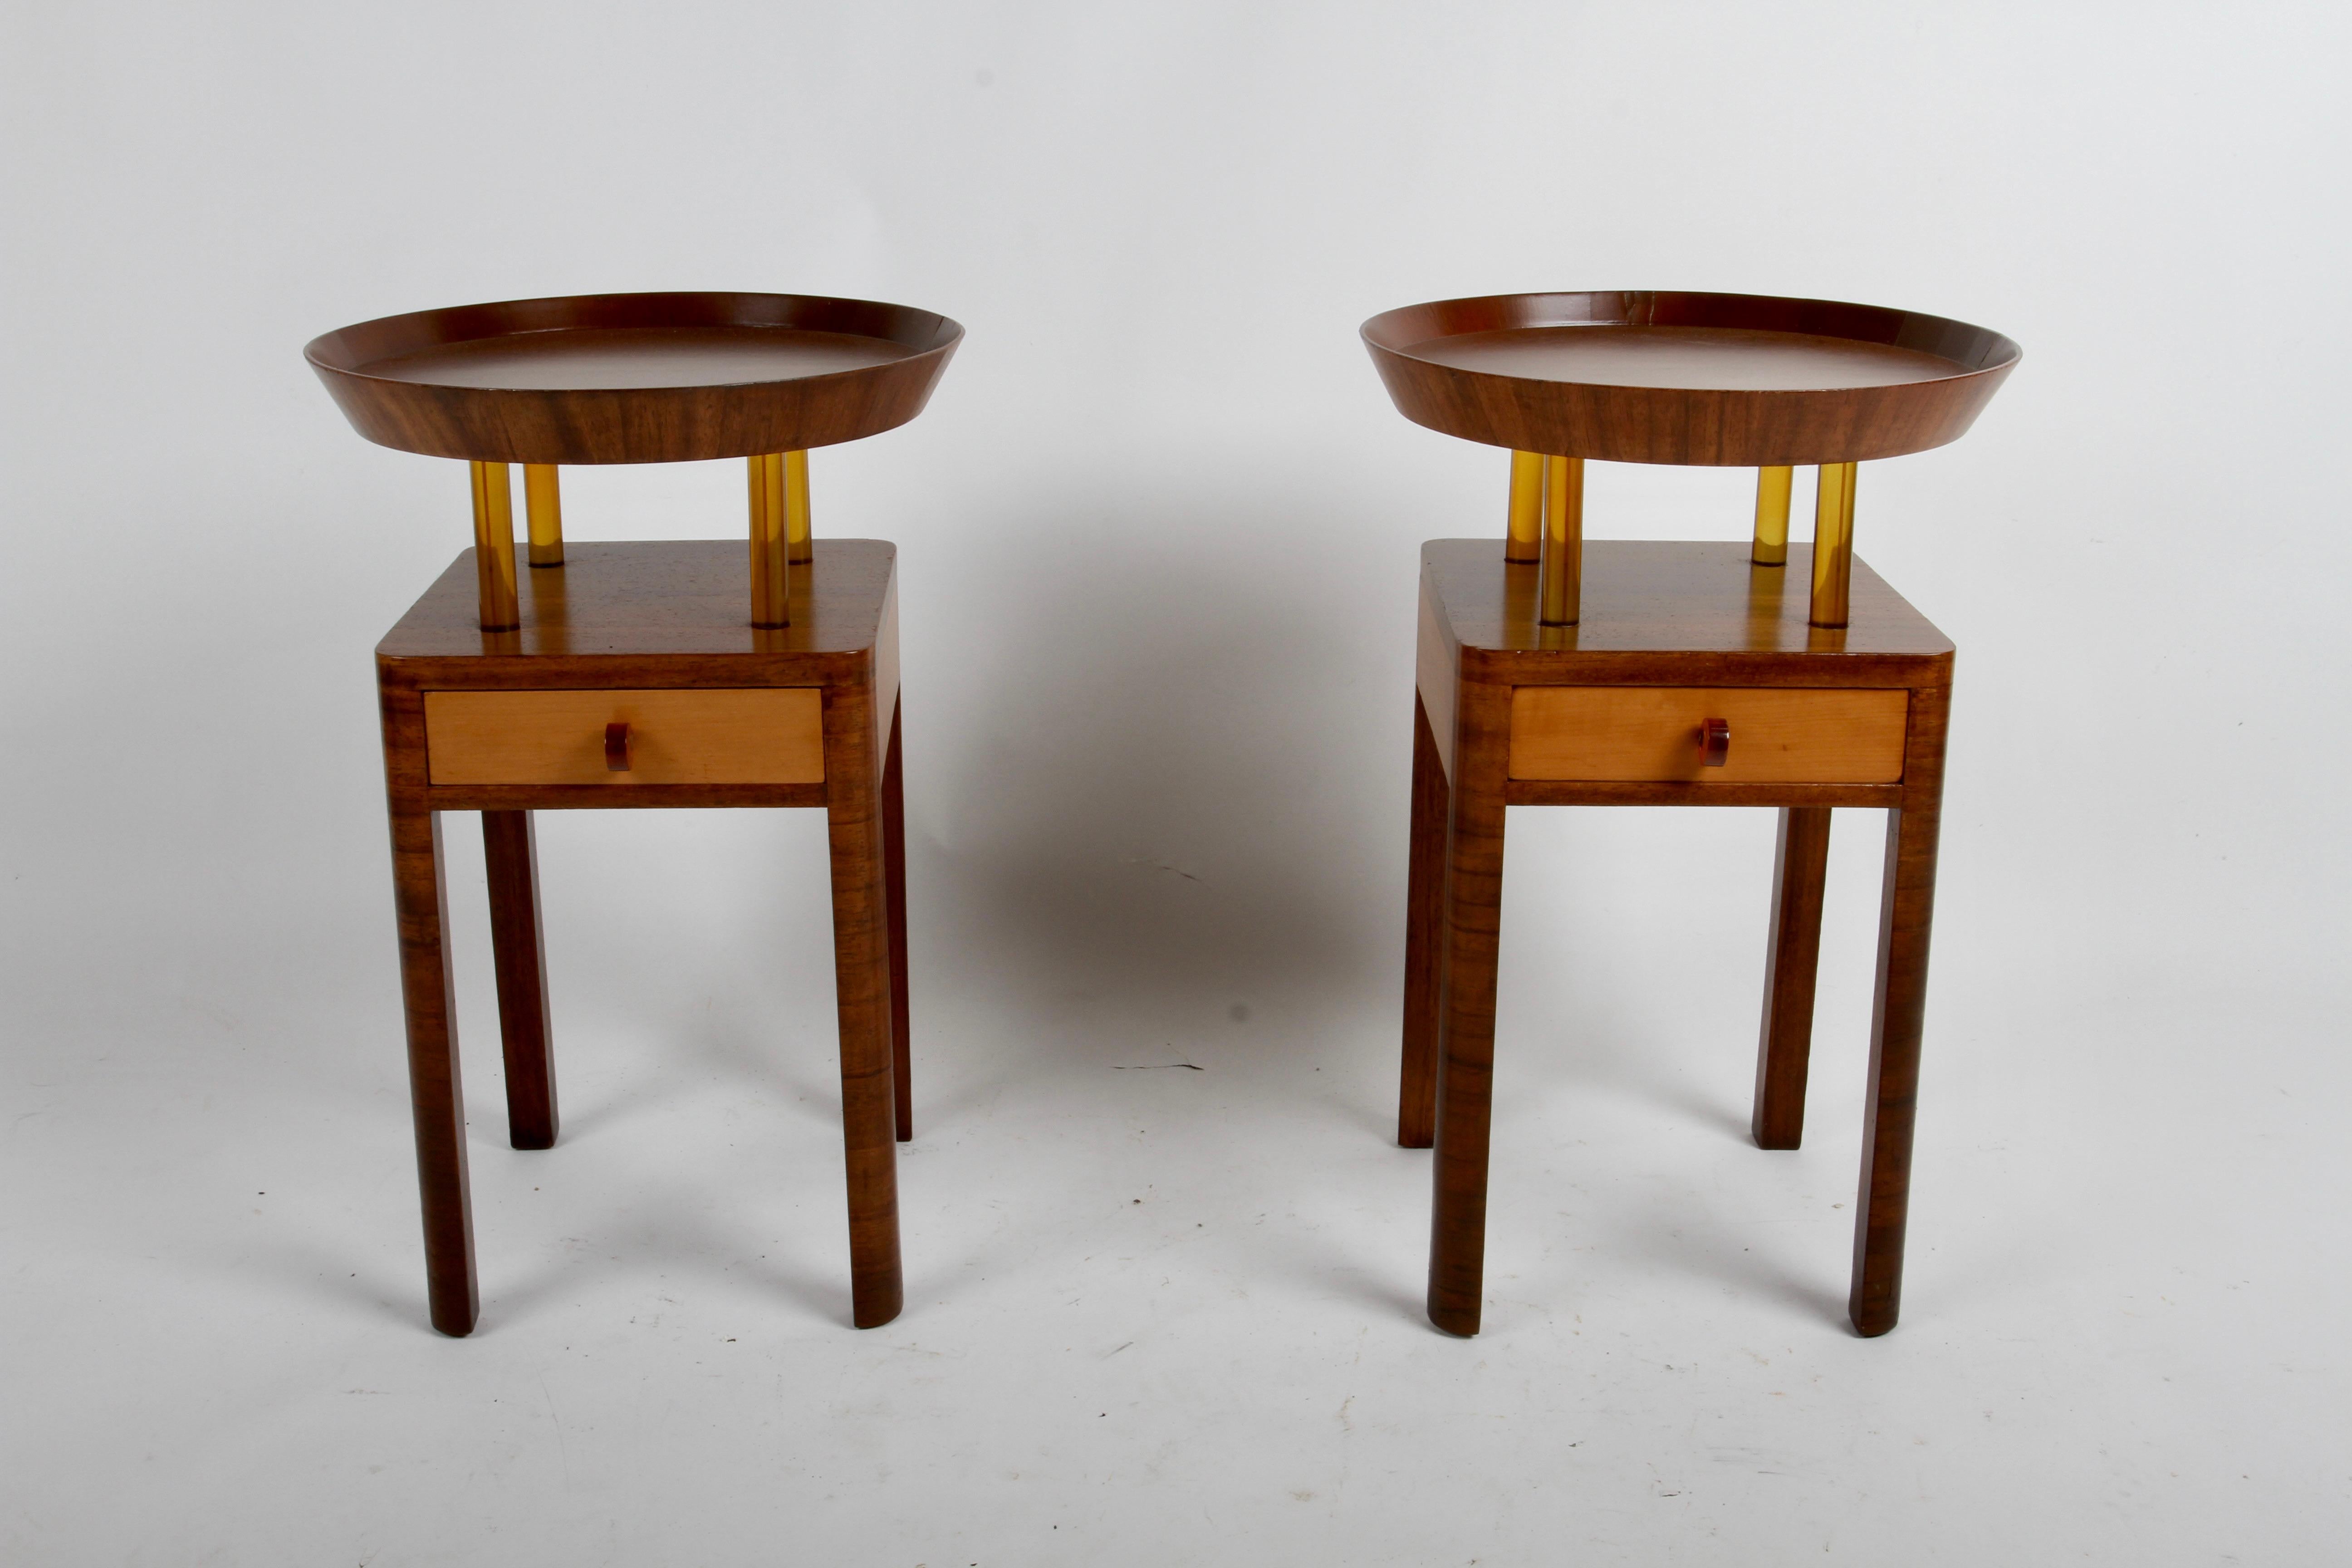 Rare Pair of 1940s Grosfeld House Round Tray Top End Table with Bakelite Details im Zustand „Gut“ im Angebot in St. Louis, MO